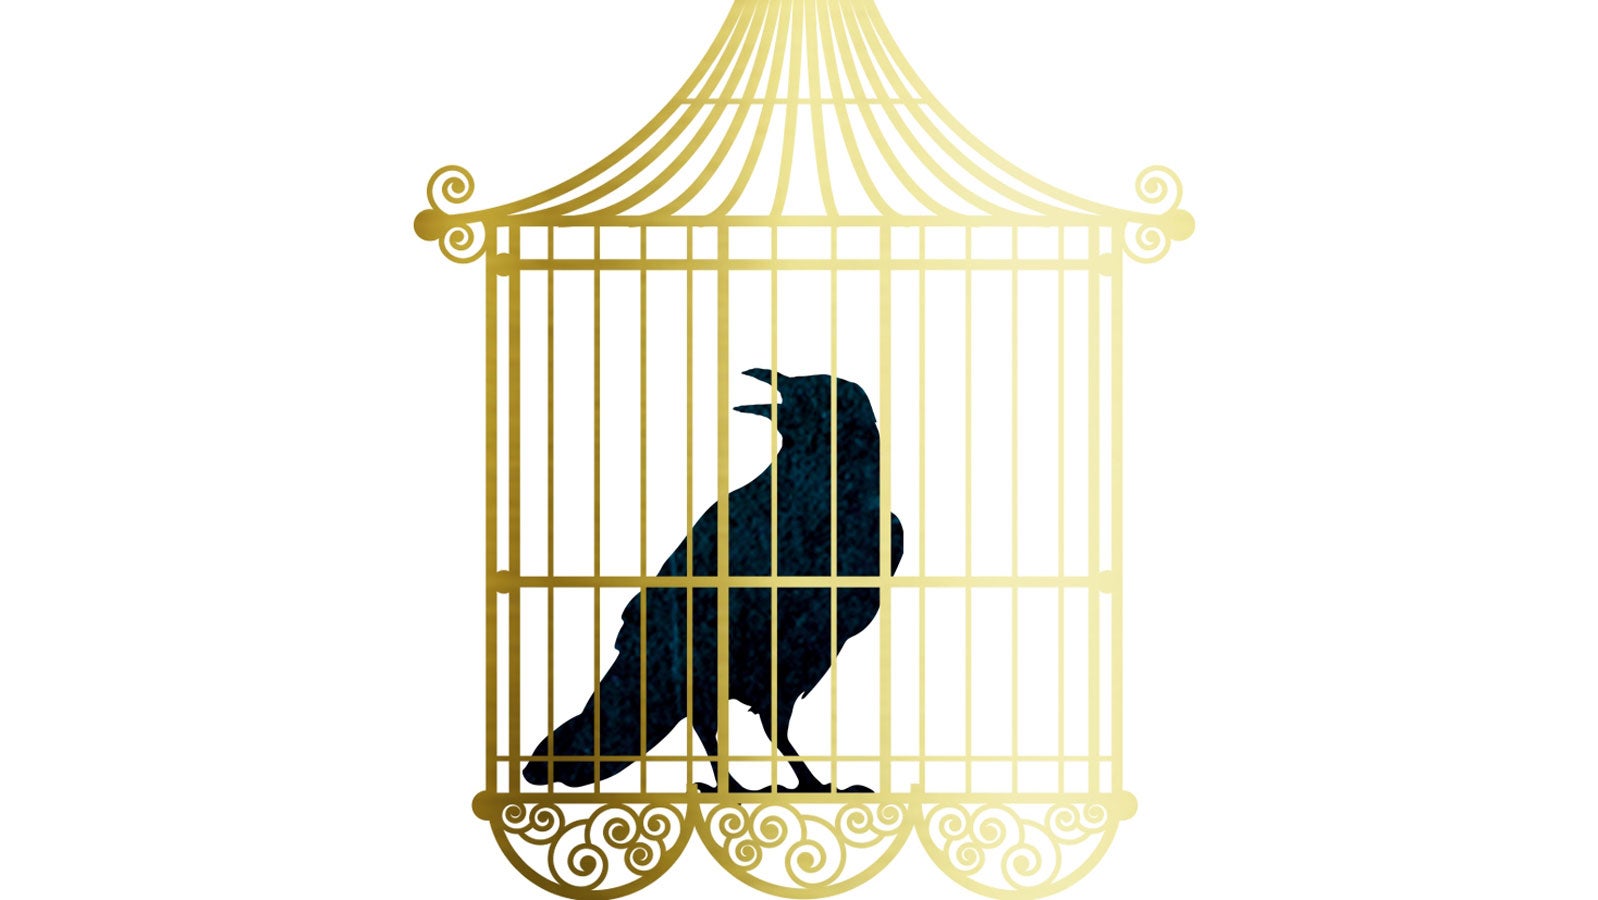 Illustration of a raven in a gold cage